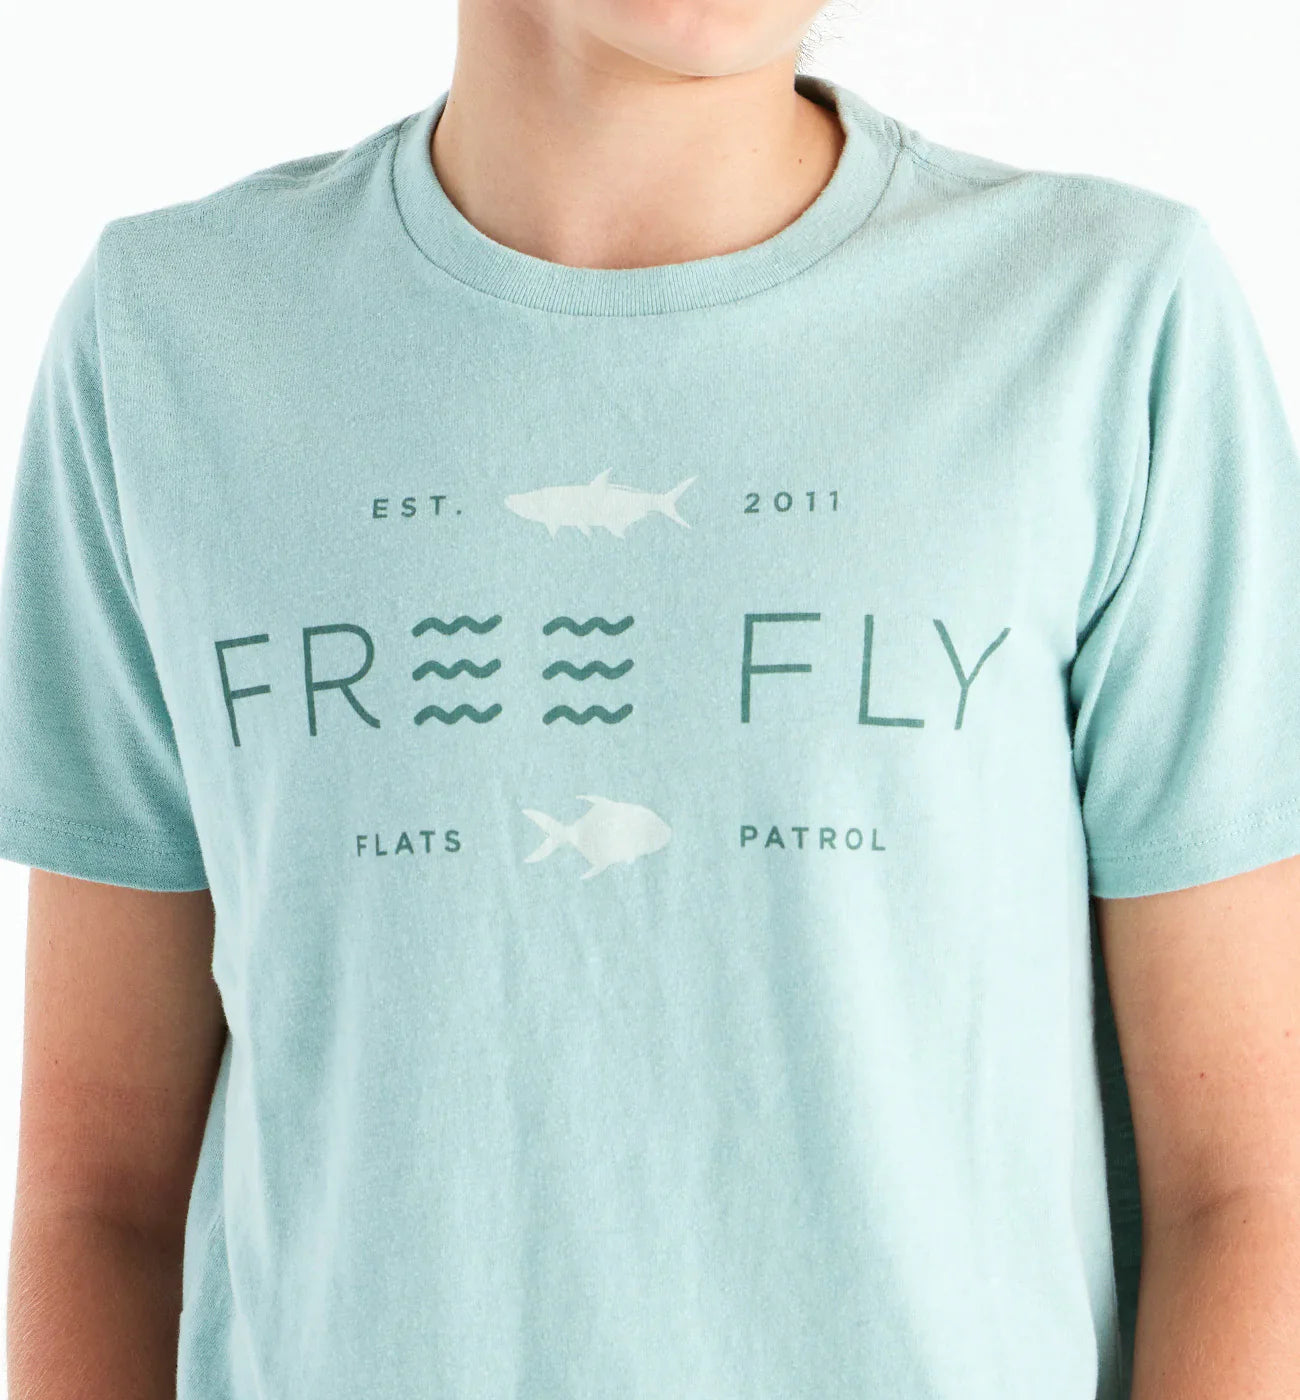 Free Fly Youth Tropic Hangout Tee